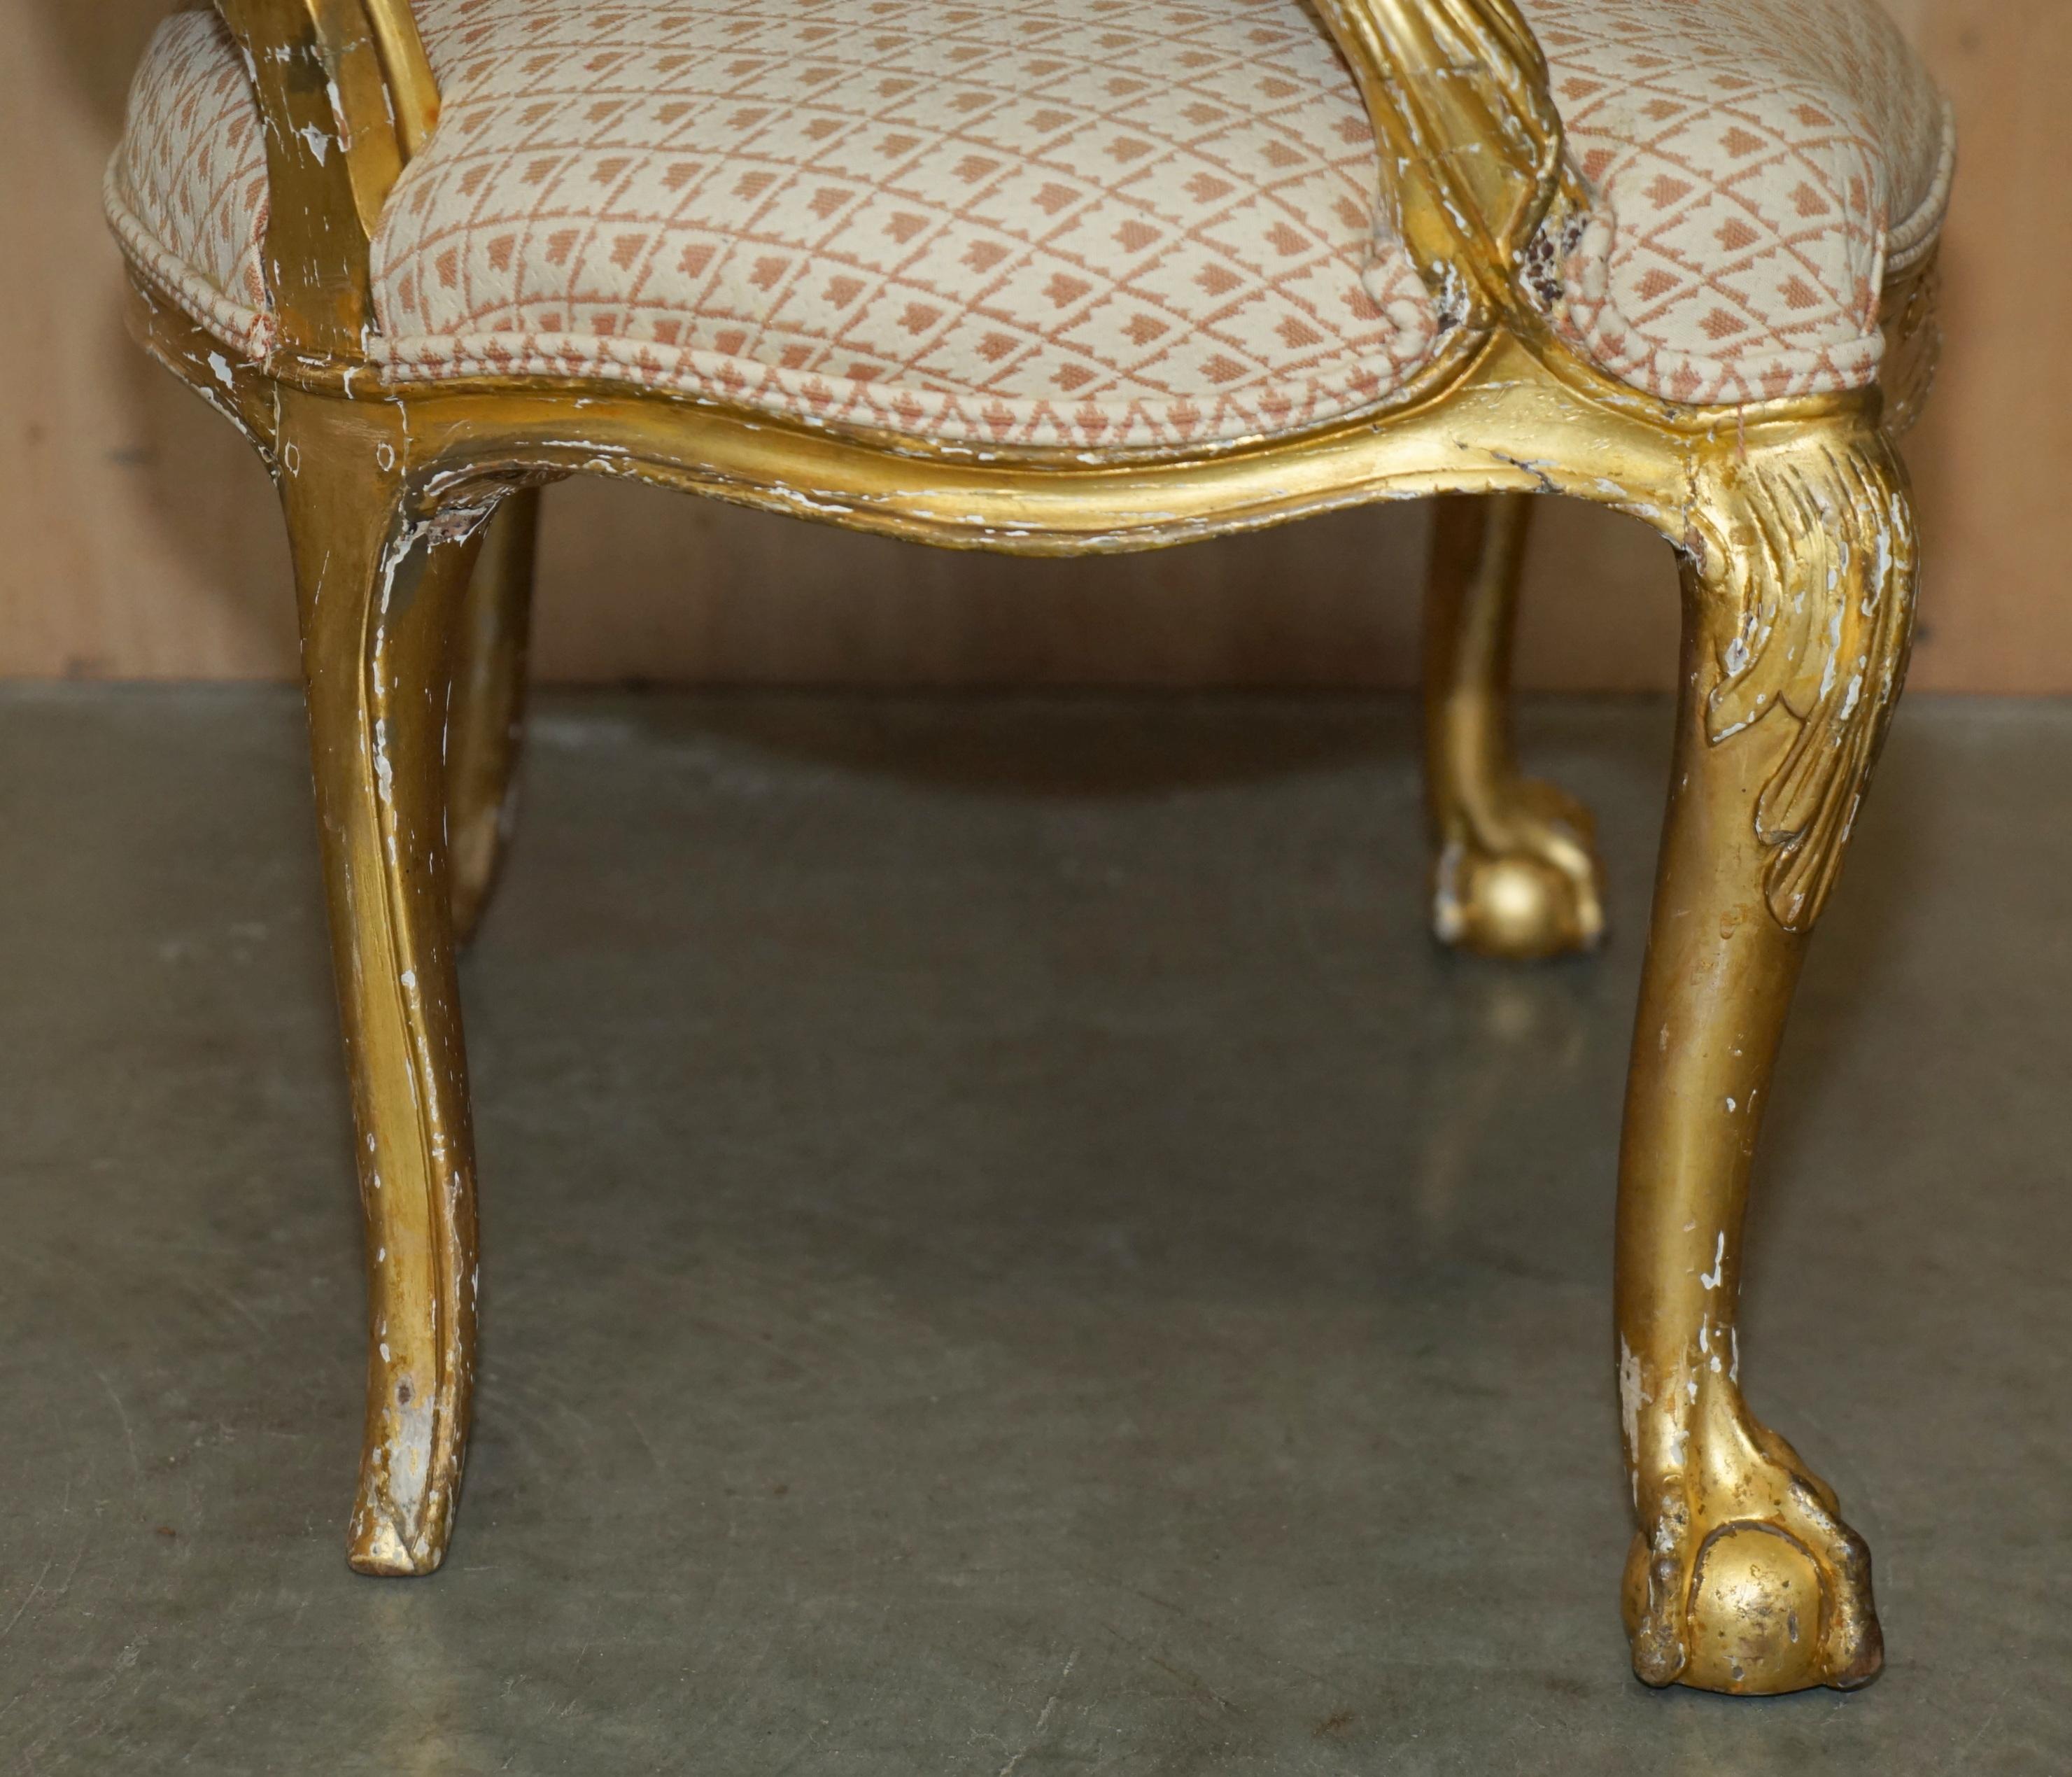 FINE GOLD GILTWOOD 18TH CENTURY CLAW & BALL FEET CARVED ANTIQUE BERGERE ARMCHAiR For Sale 9